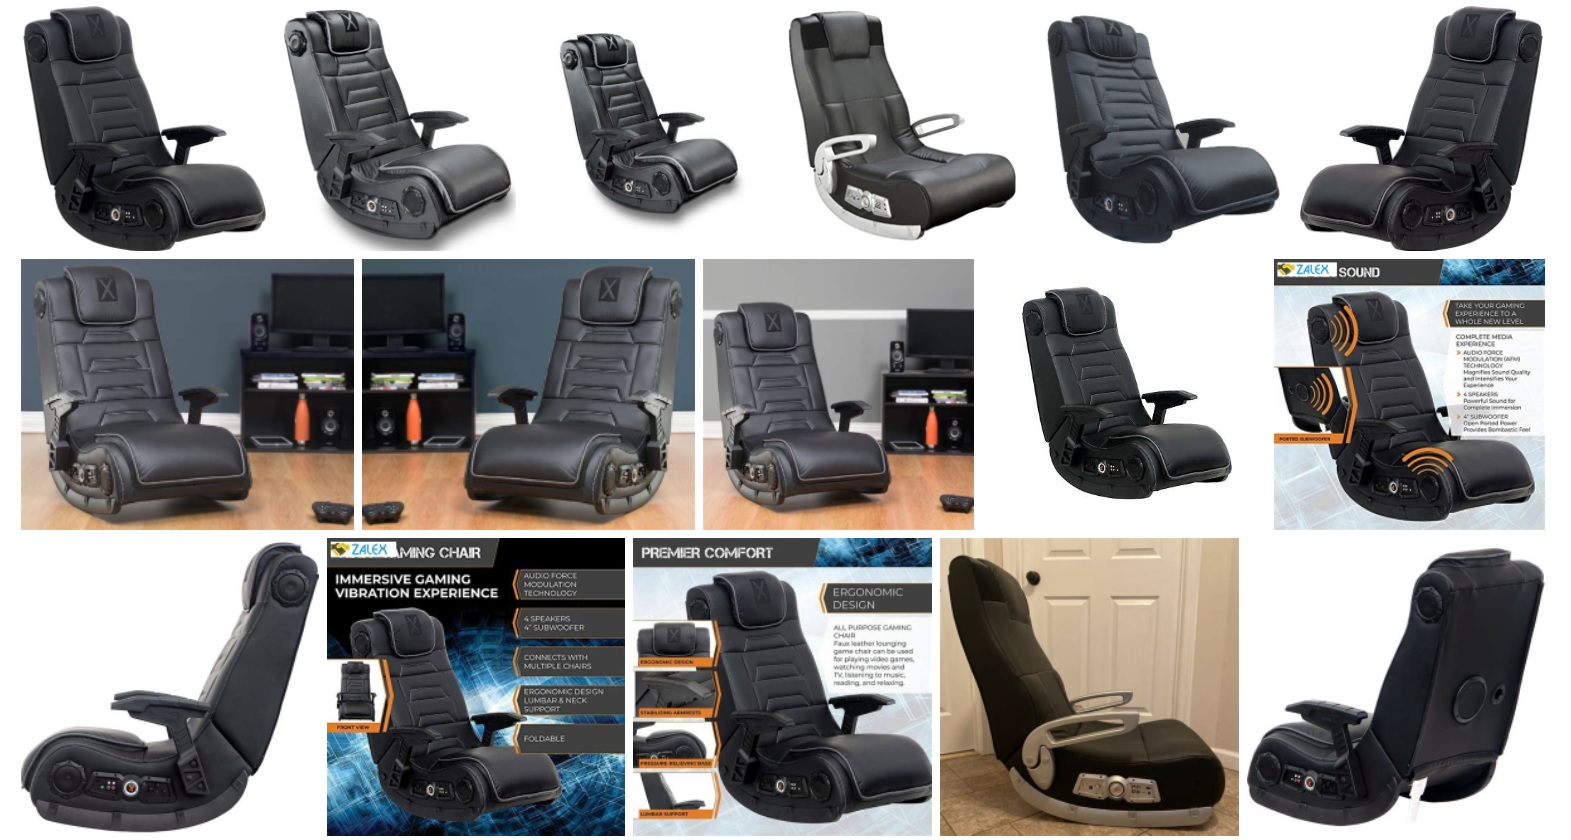 x rocker gaming chair, gaming chair with speakers, floor gaming chair, gaming chairs near me,